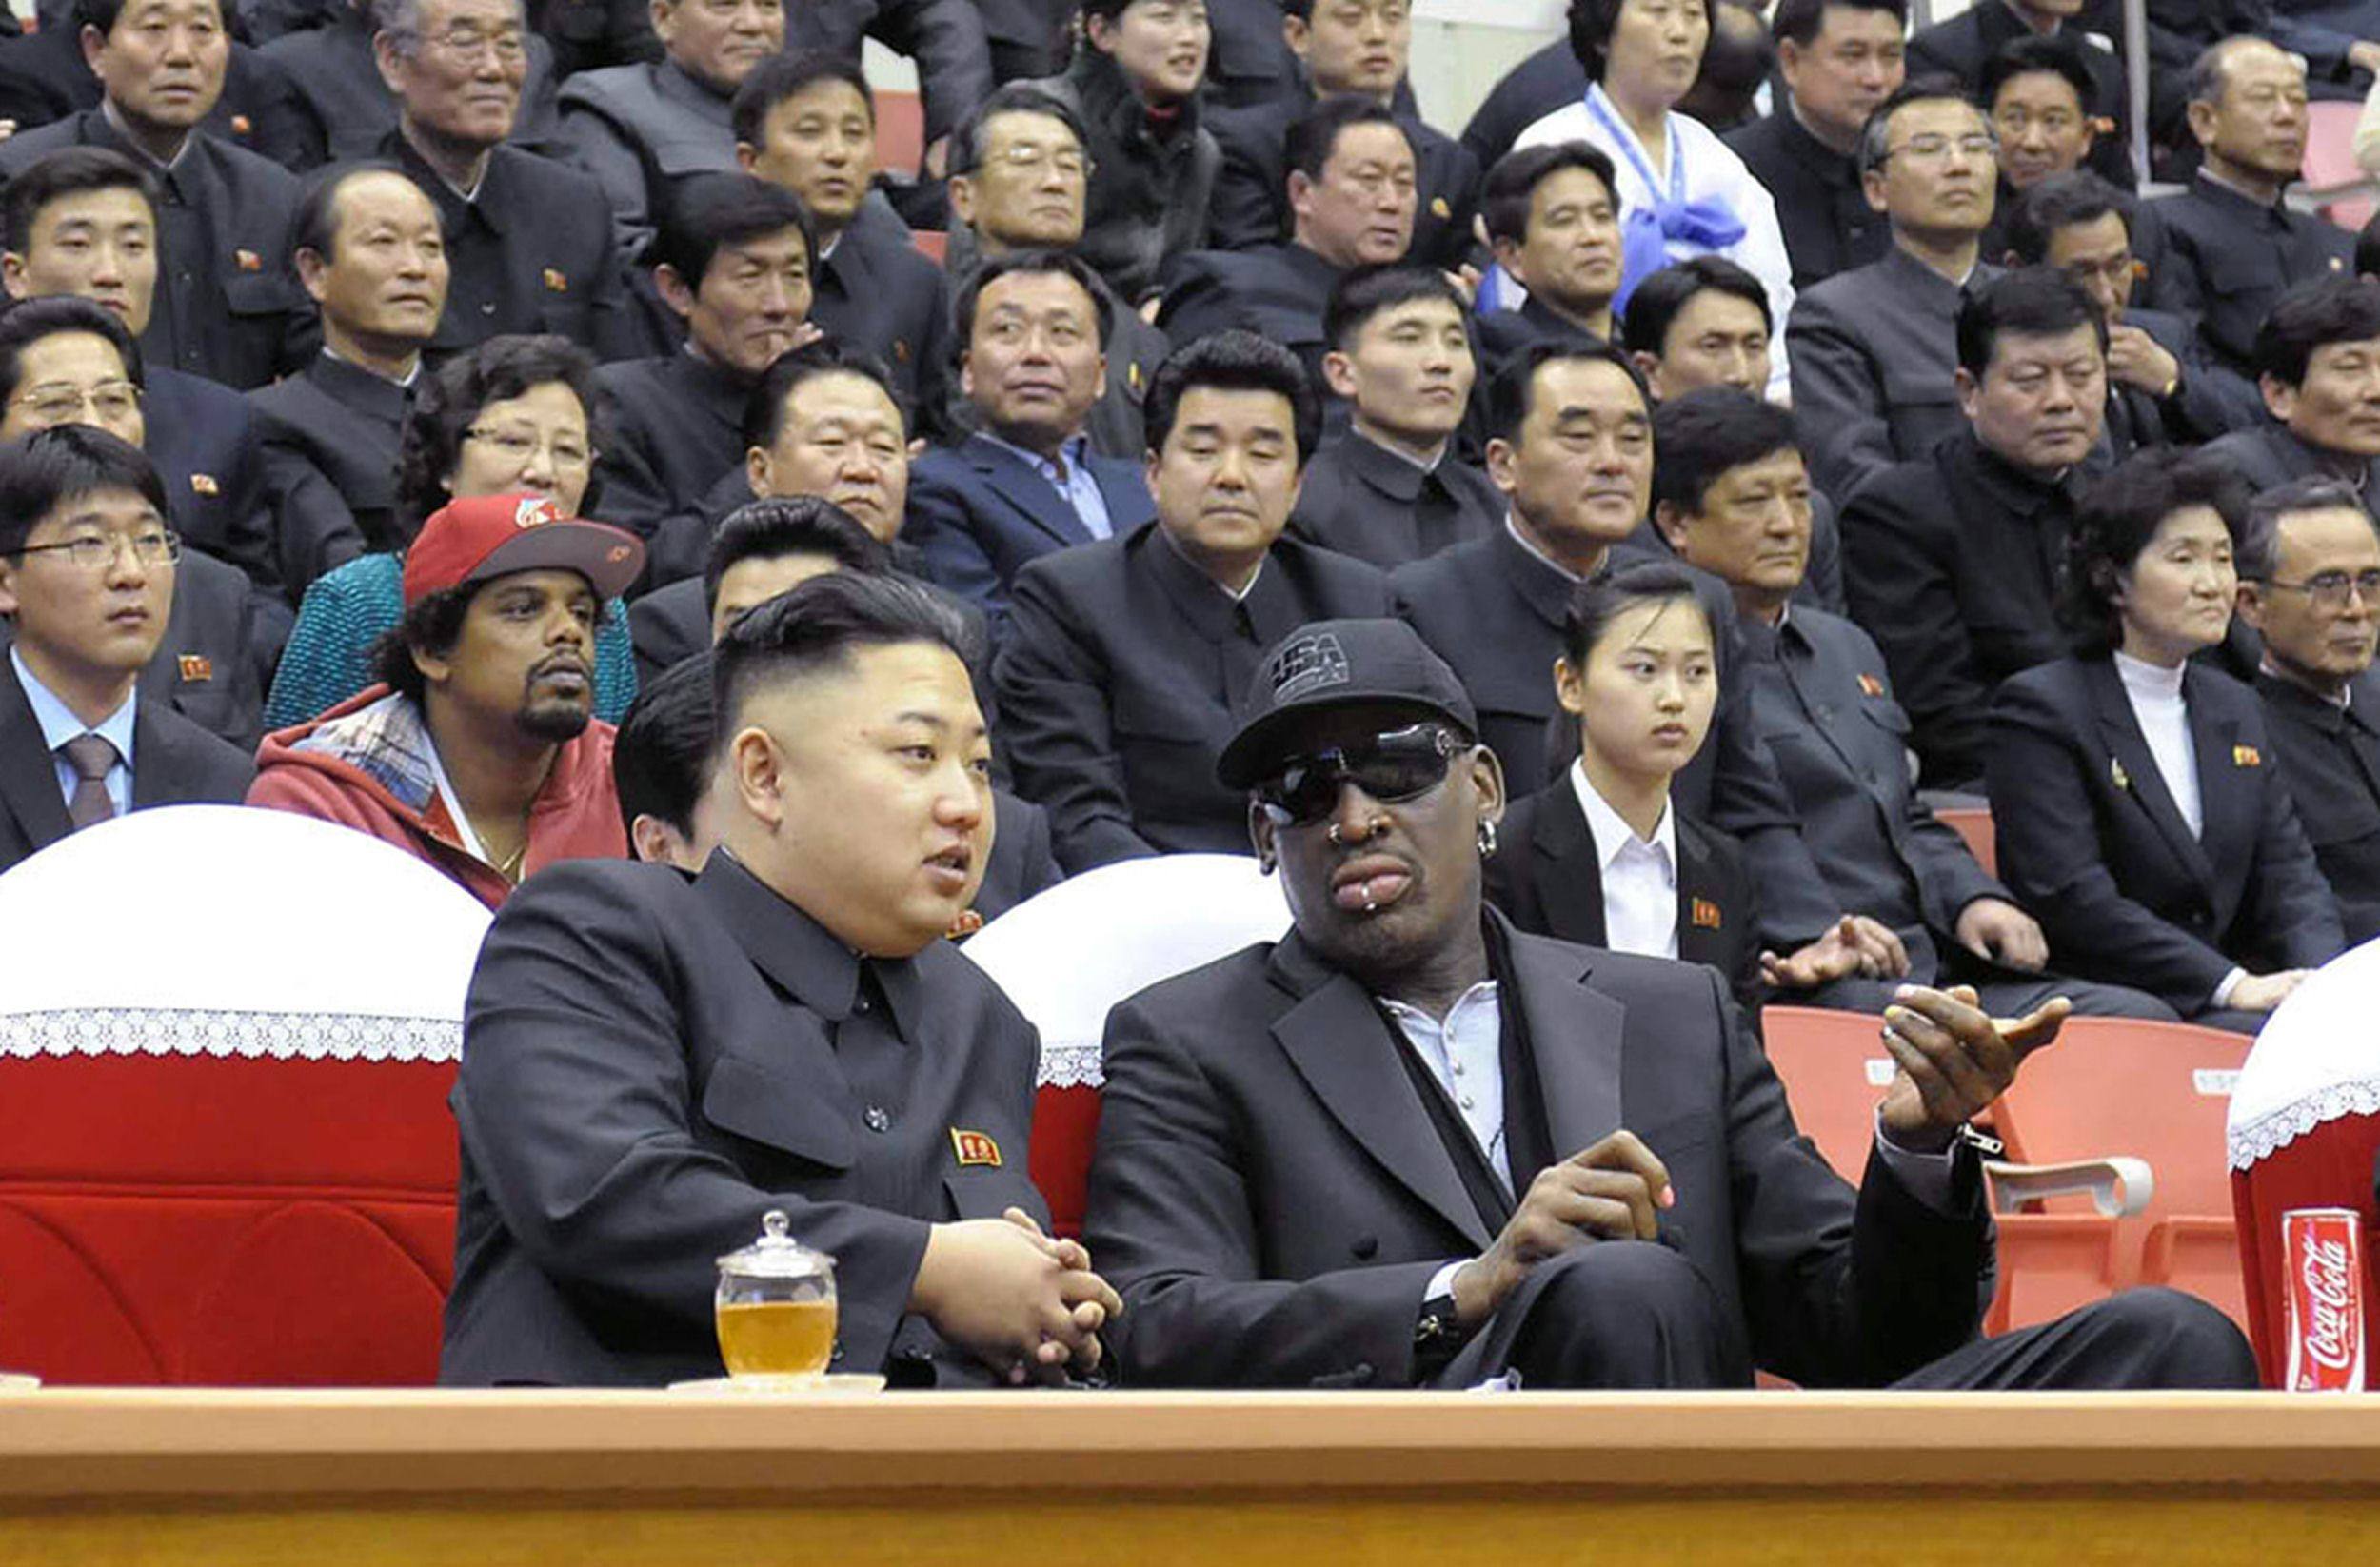 North Korean leader Kim Jong-un and former NBA star Dennis Rodman speaking at a basketball game in Pyongyang in March 2013. Photo: KCNA  